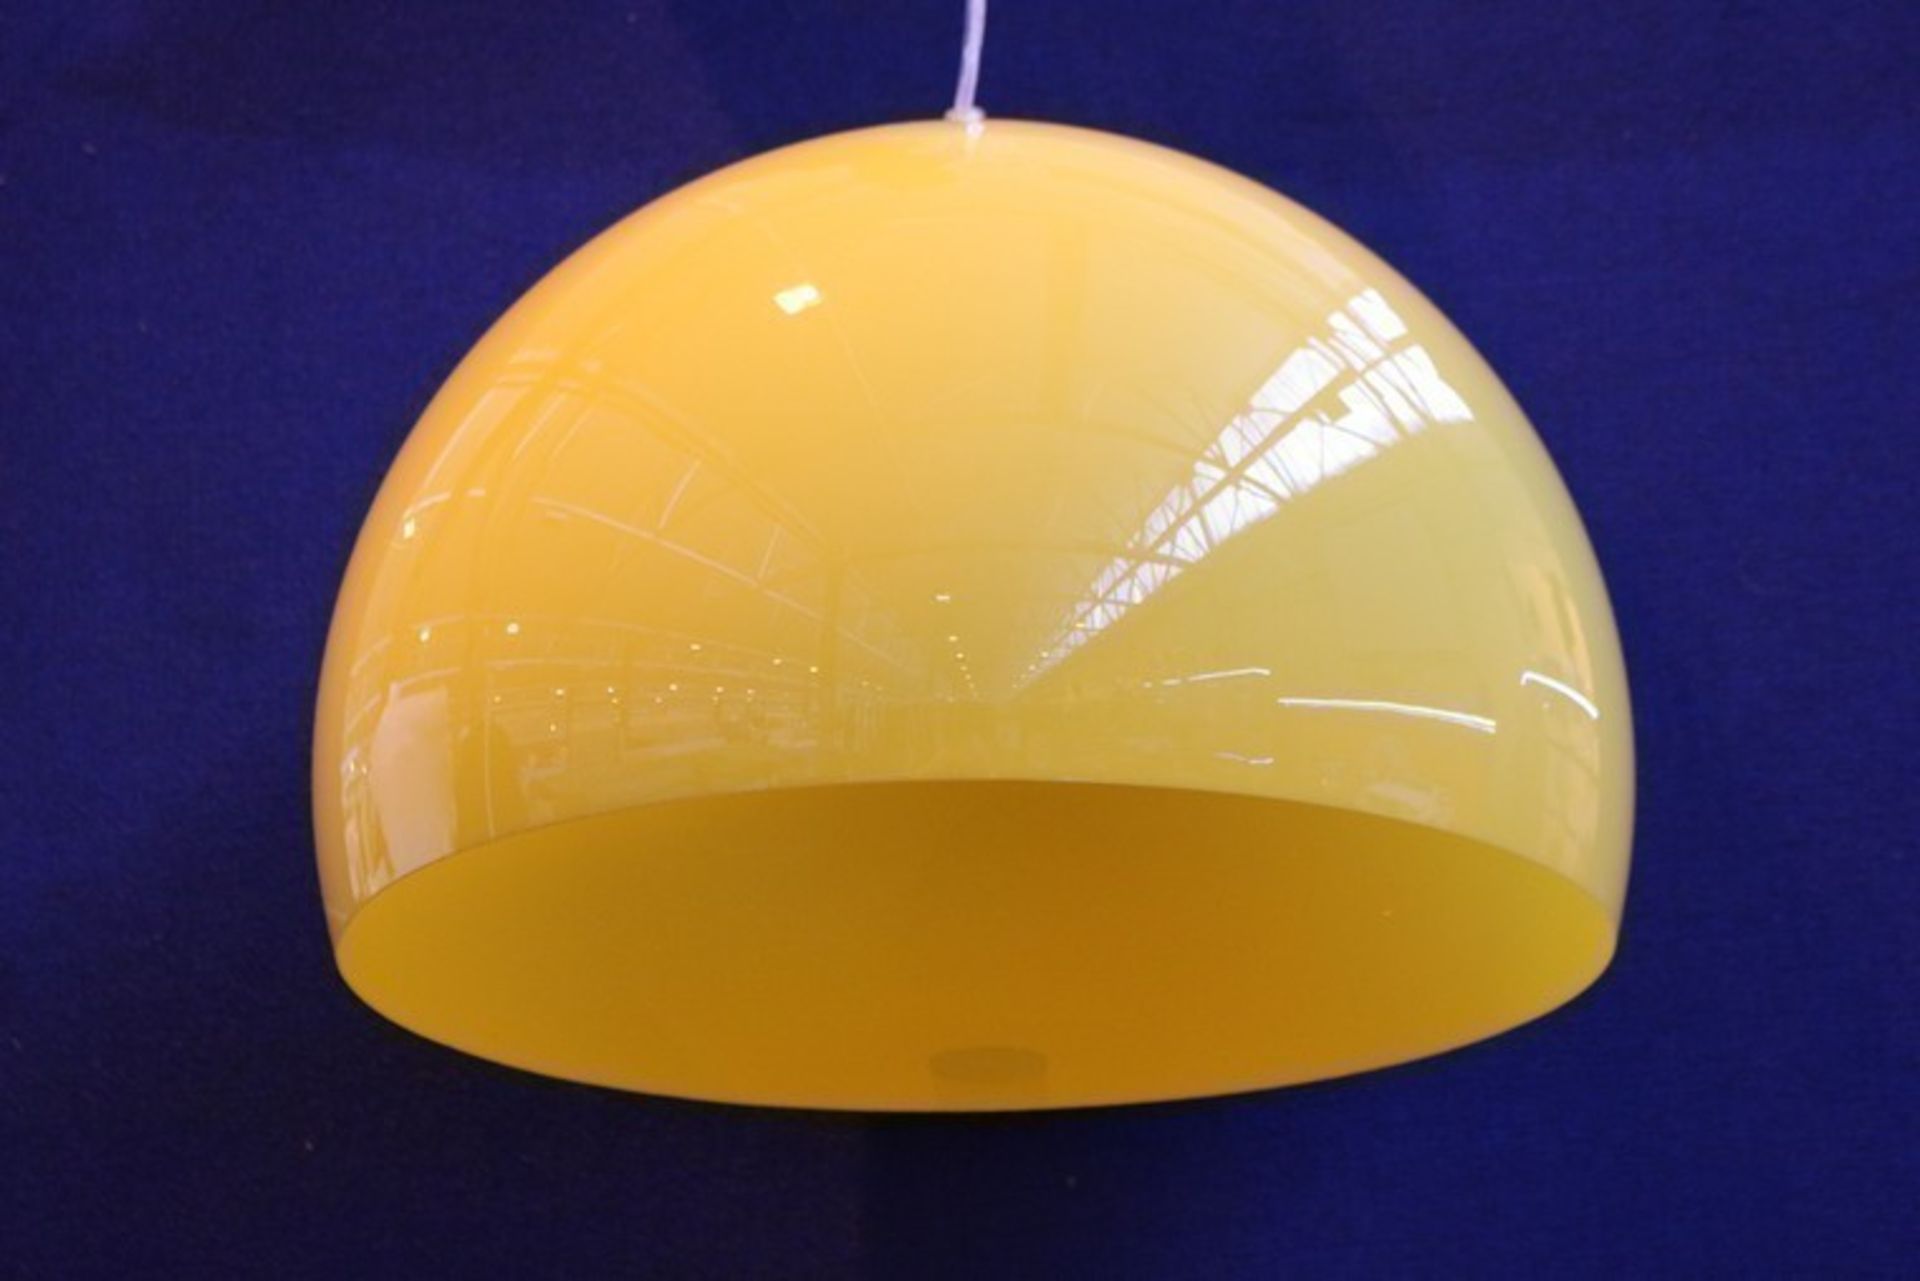 1 x FLY STYLE PENDANT CEILING LIGHT IN YELLOW (010-L) *PLEASE NOTE THAT THE BID PRICE IS